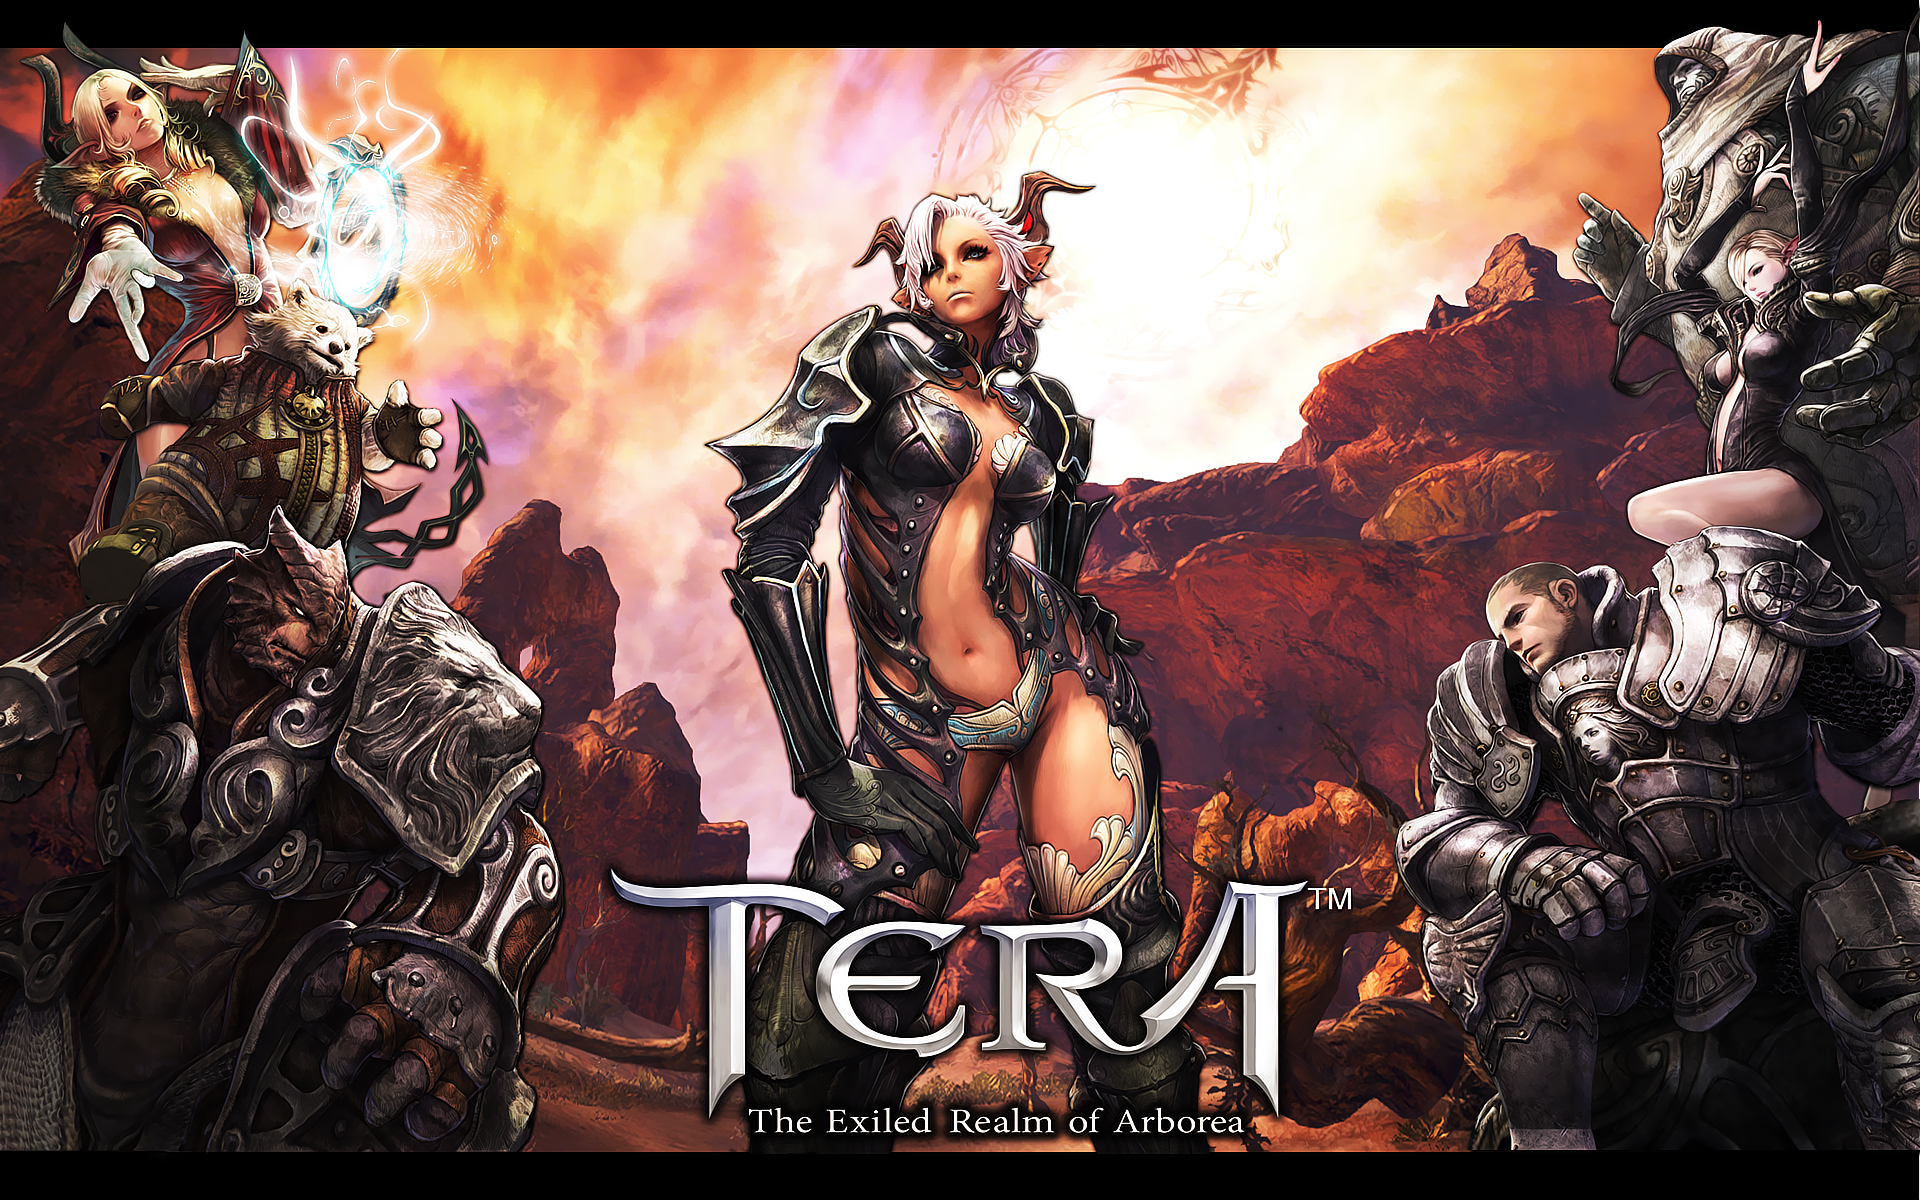 TERA Beta Sign Ups Have Started